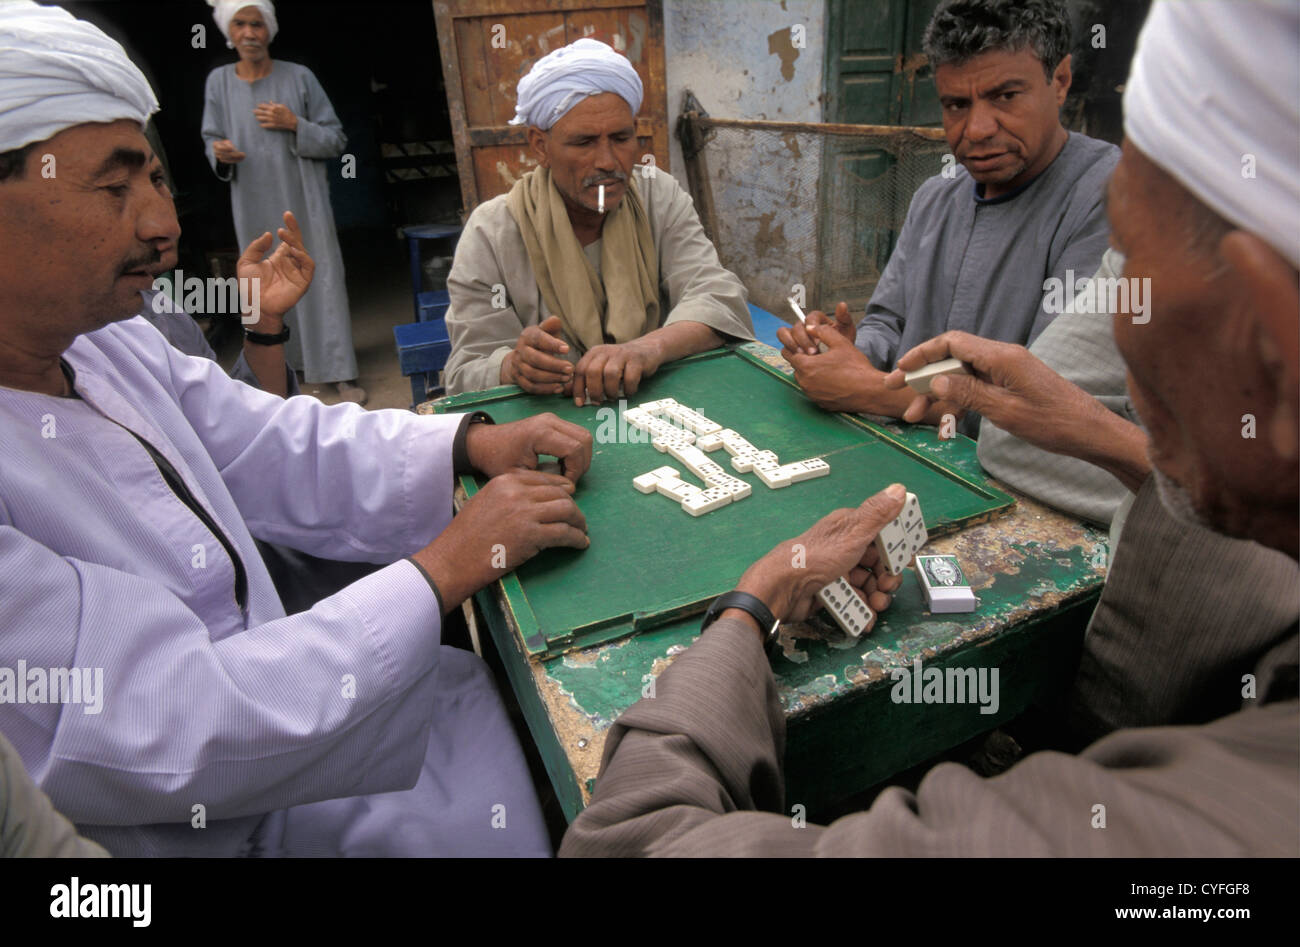 Egypt, Nile river, Luxor, West Bank, farmers playing domino Stock Photo